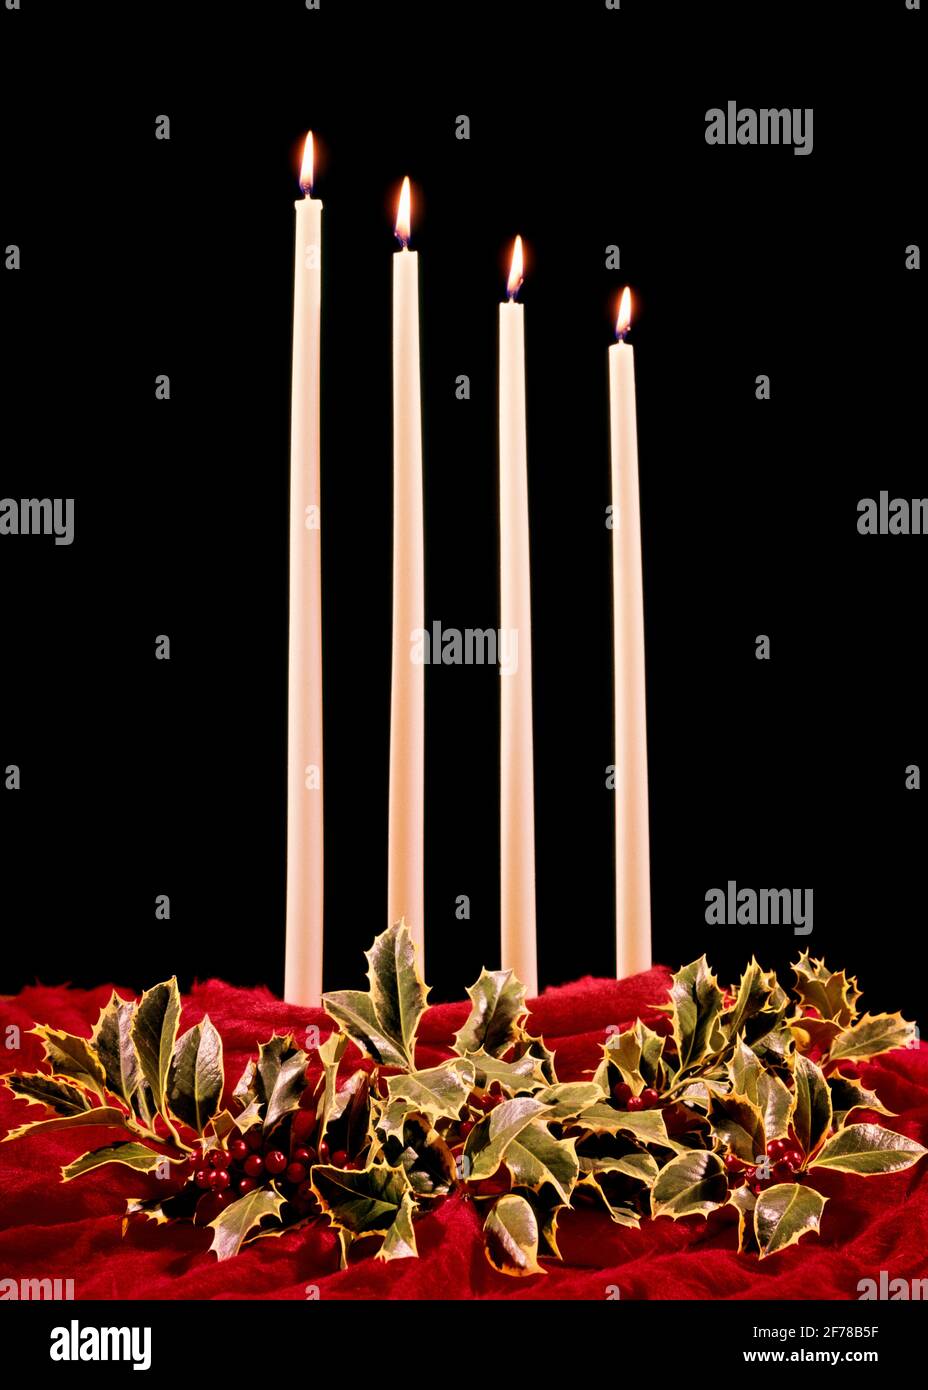 1960s CHRISTMAS STILL LIFE DECORATION FOUR BURNING TALL WHITE WAX CANDLES AND SURROUNDING HOLLY LEAVES AND BERRIES ON RED FABRIC - kx3750 HAR001 HARS SYMBOLIC BERRIES CONCEPTS JOYOUS FESTIVE HAR001 LIGHTED OLD FASHIONED REPRESENTATION Stock Photo